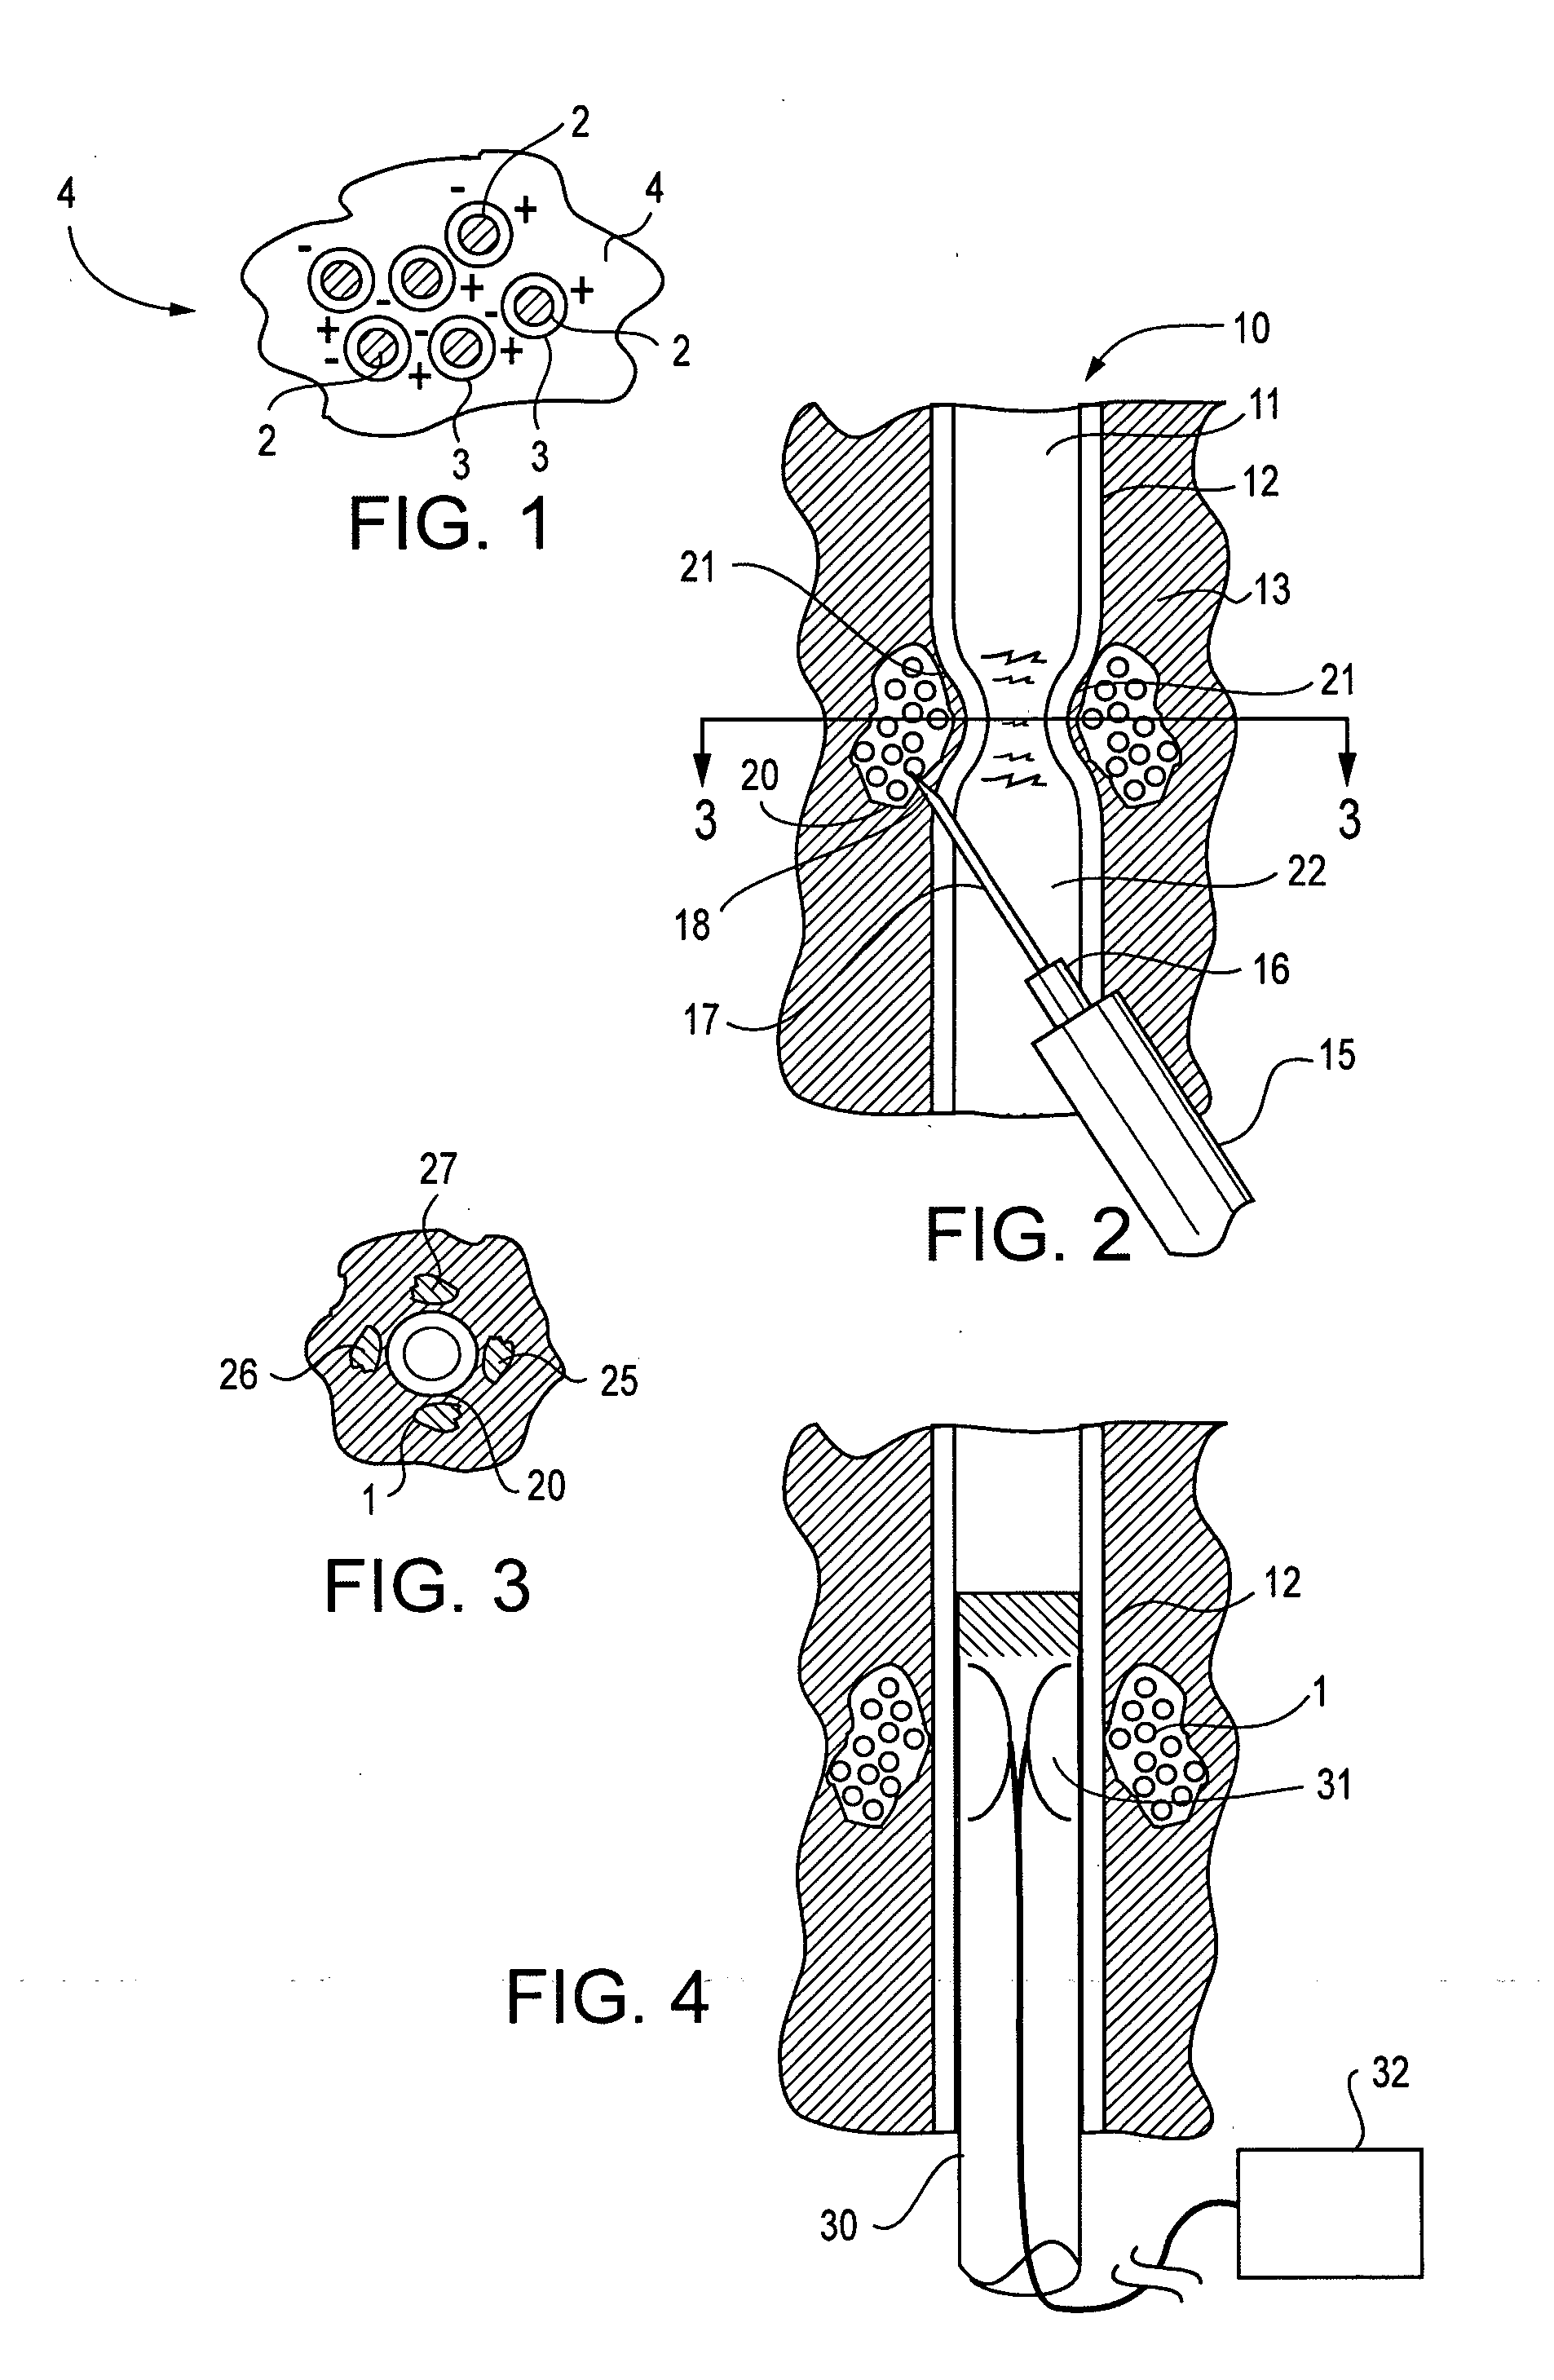 Active tissue augmentation materials and method